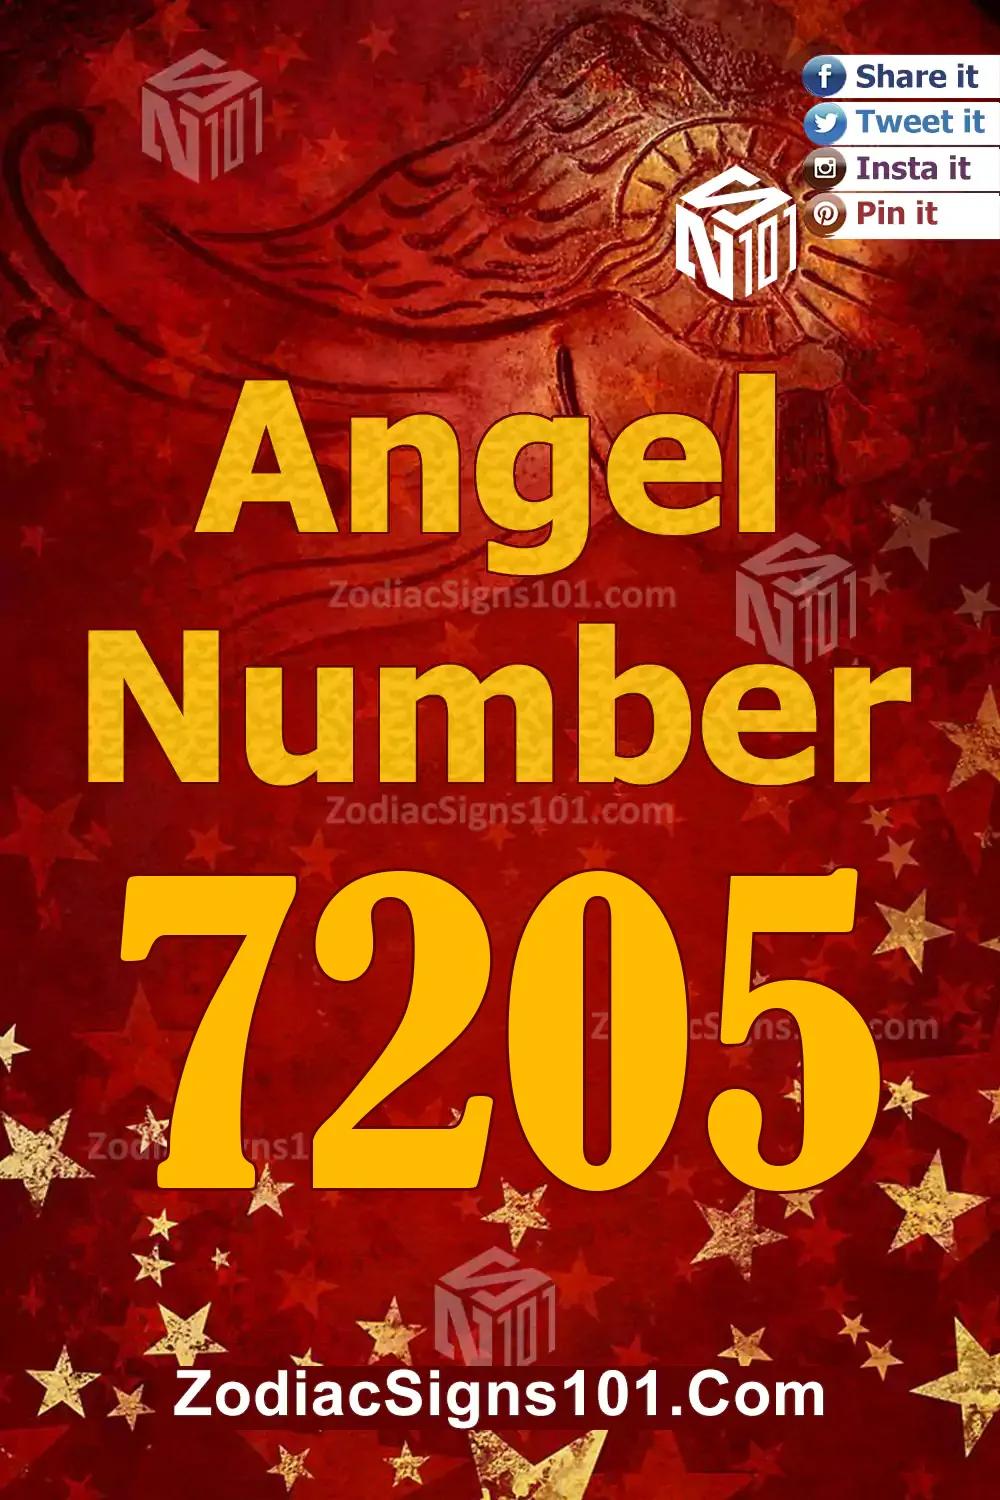 7205 Angel Number Meaning